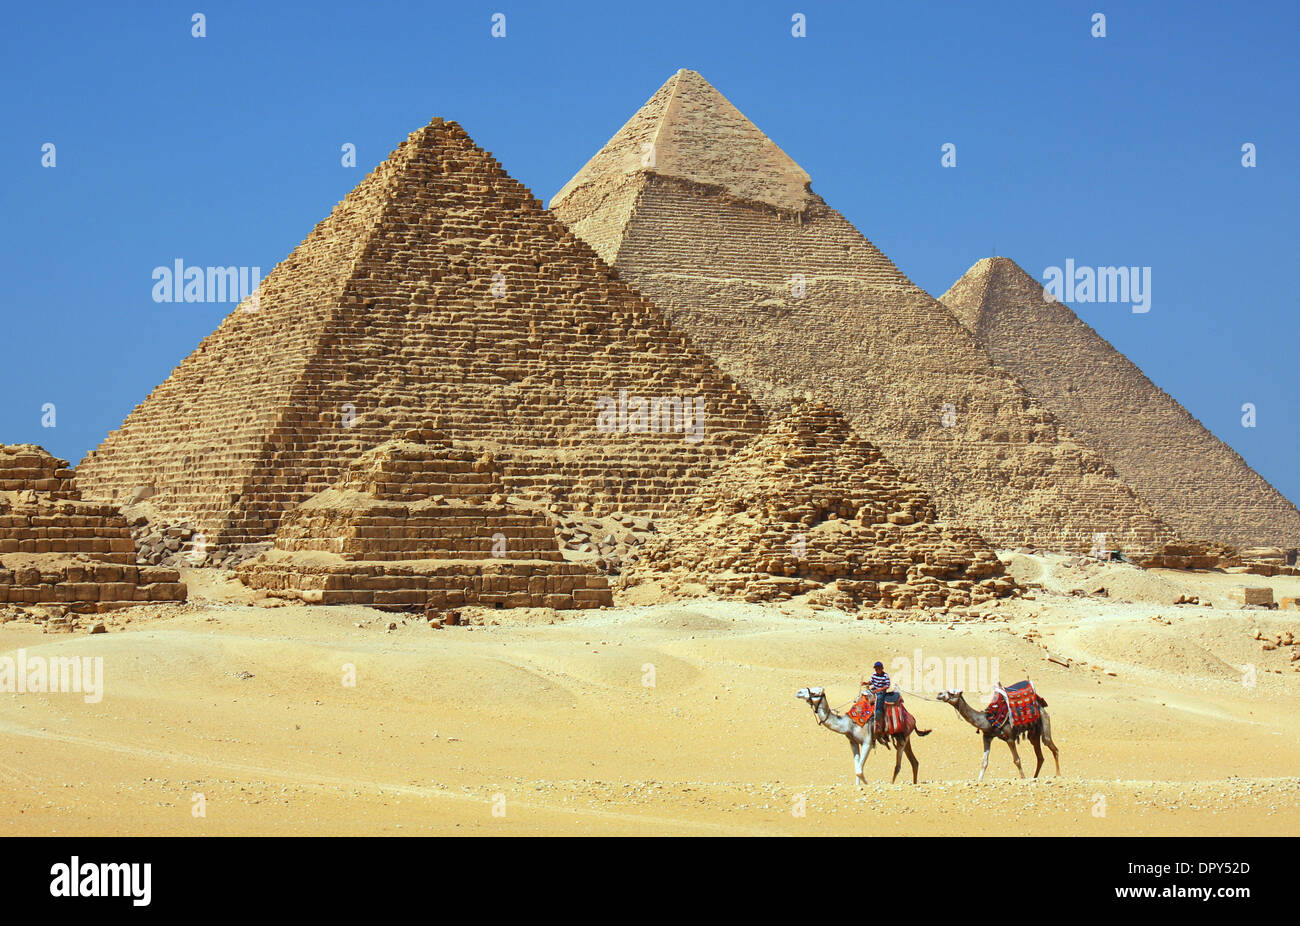 The Pyramids at Giza in Egypt Stock Photo